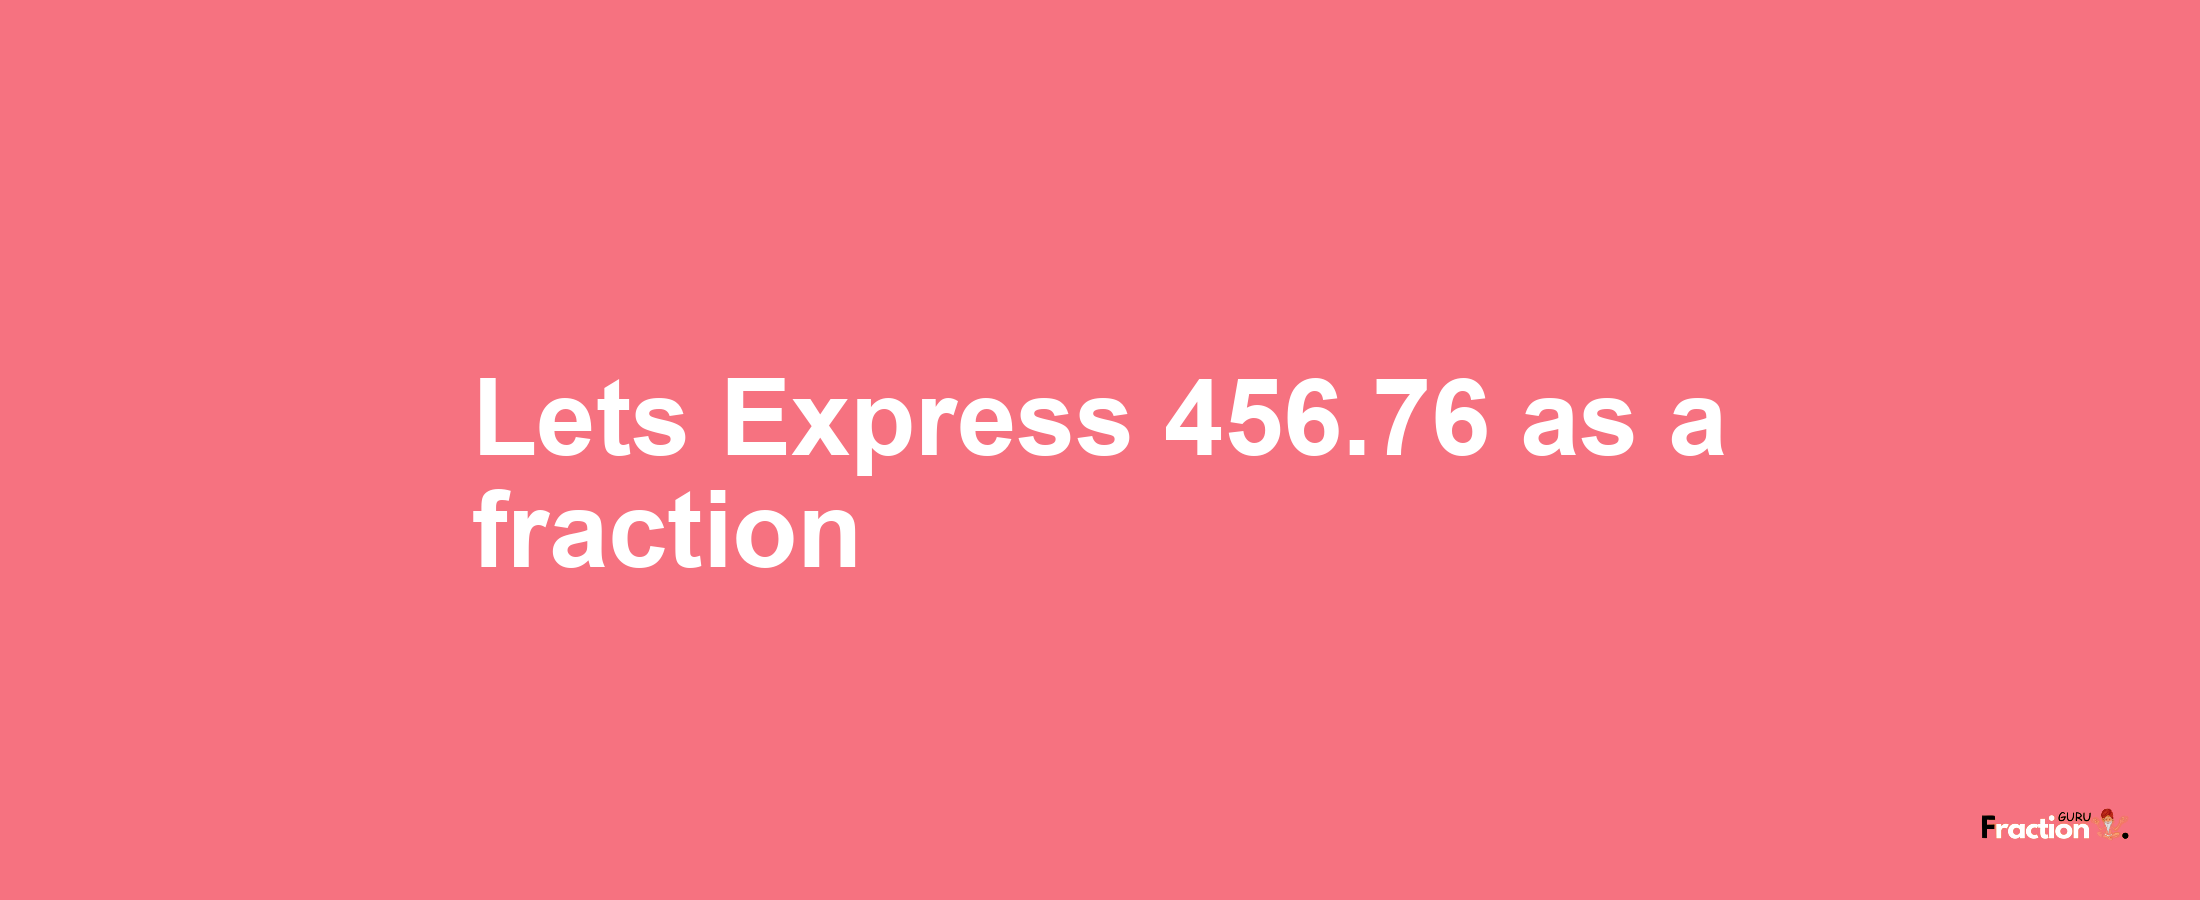 Lets Express 456.76 as afraction